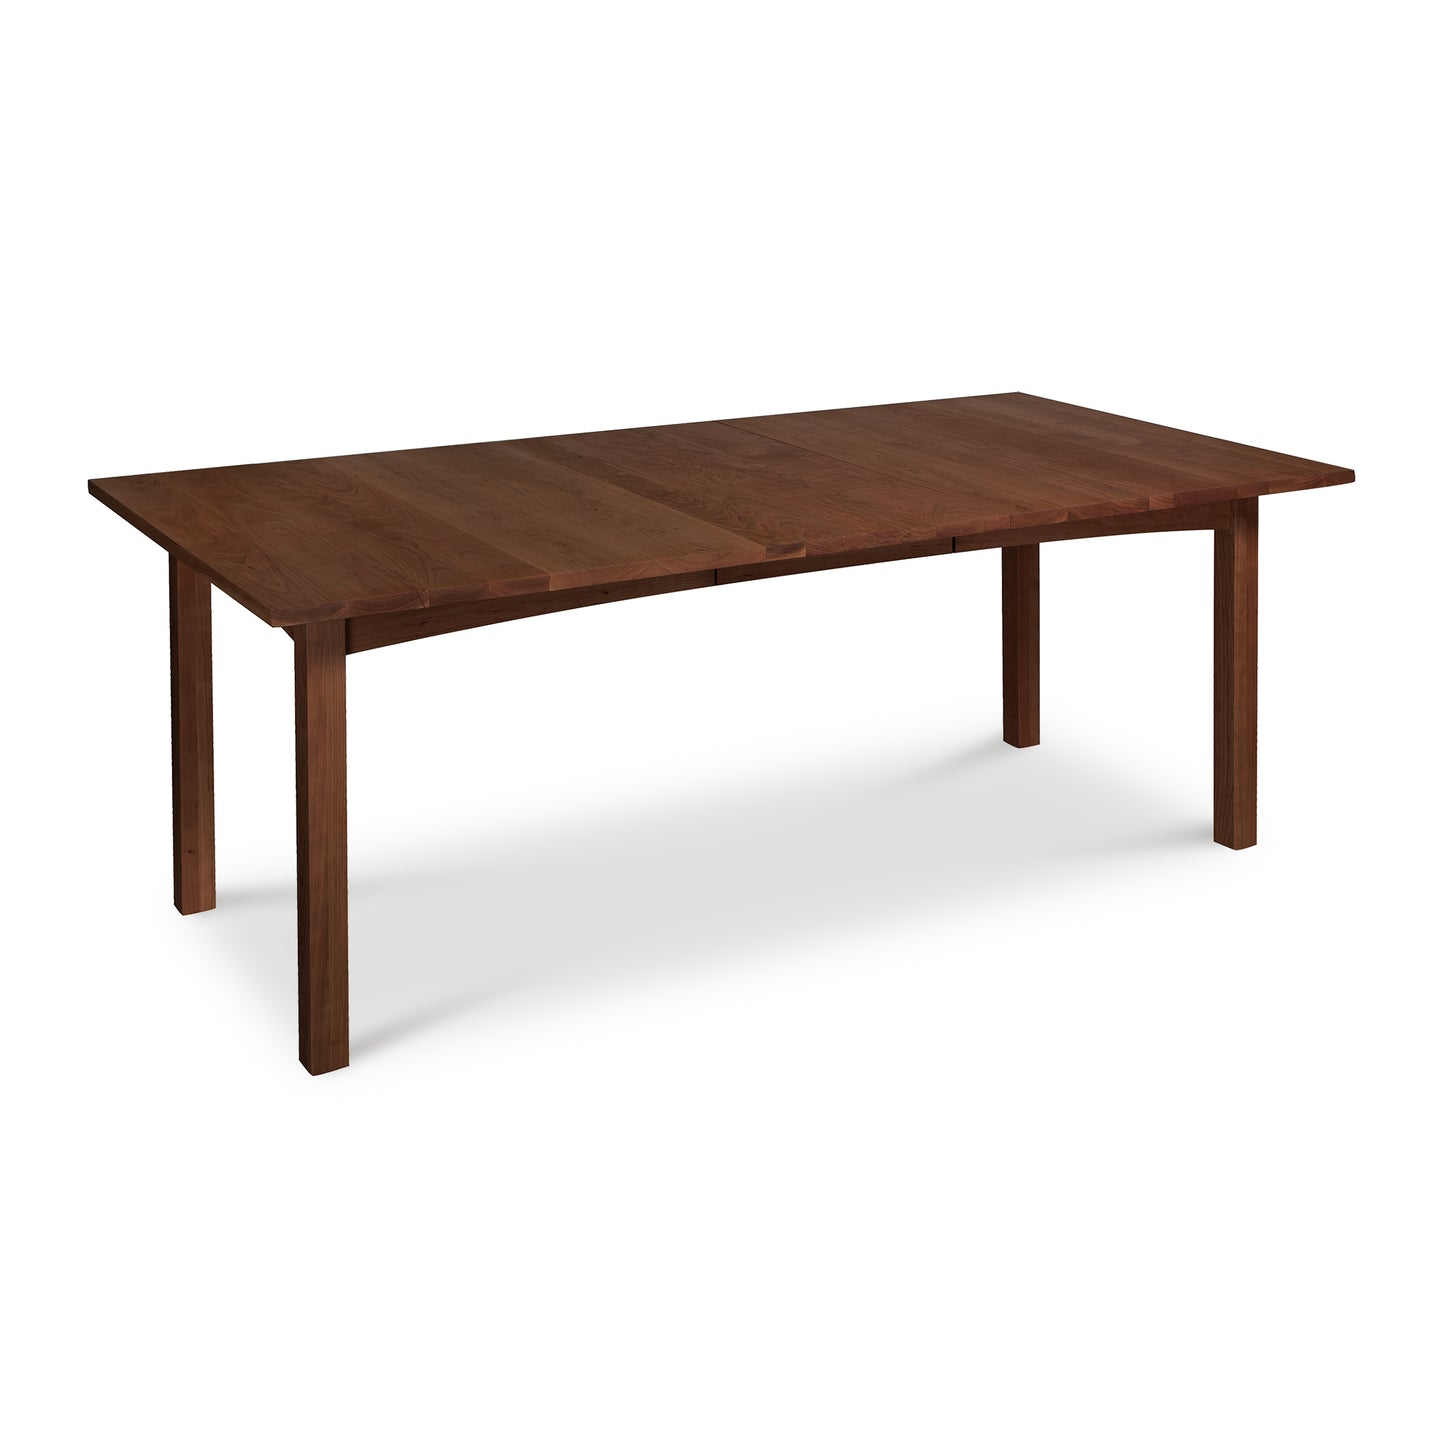 A Vermont Furniture Designs Burlington Shaker Extension Dining Table isolated on a white background.